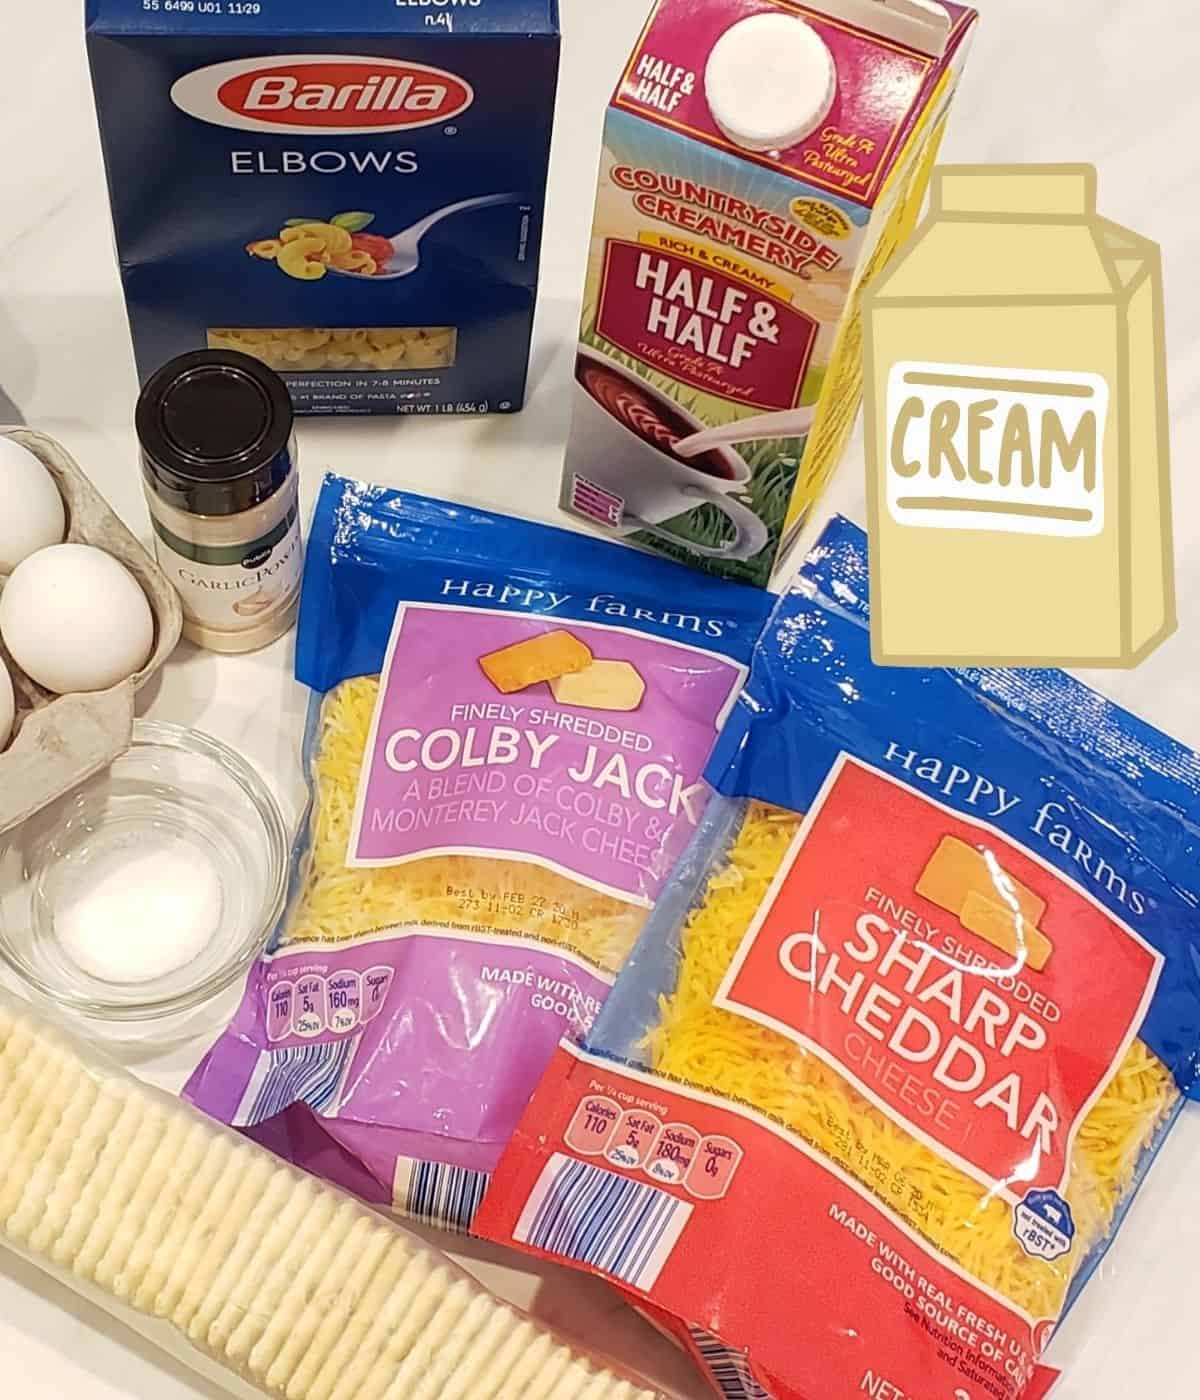 Ingredients for this recipe